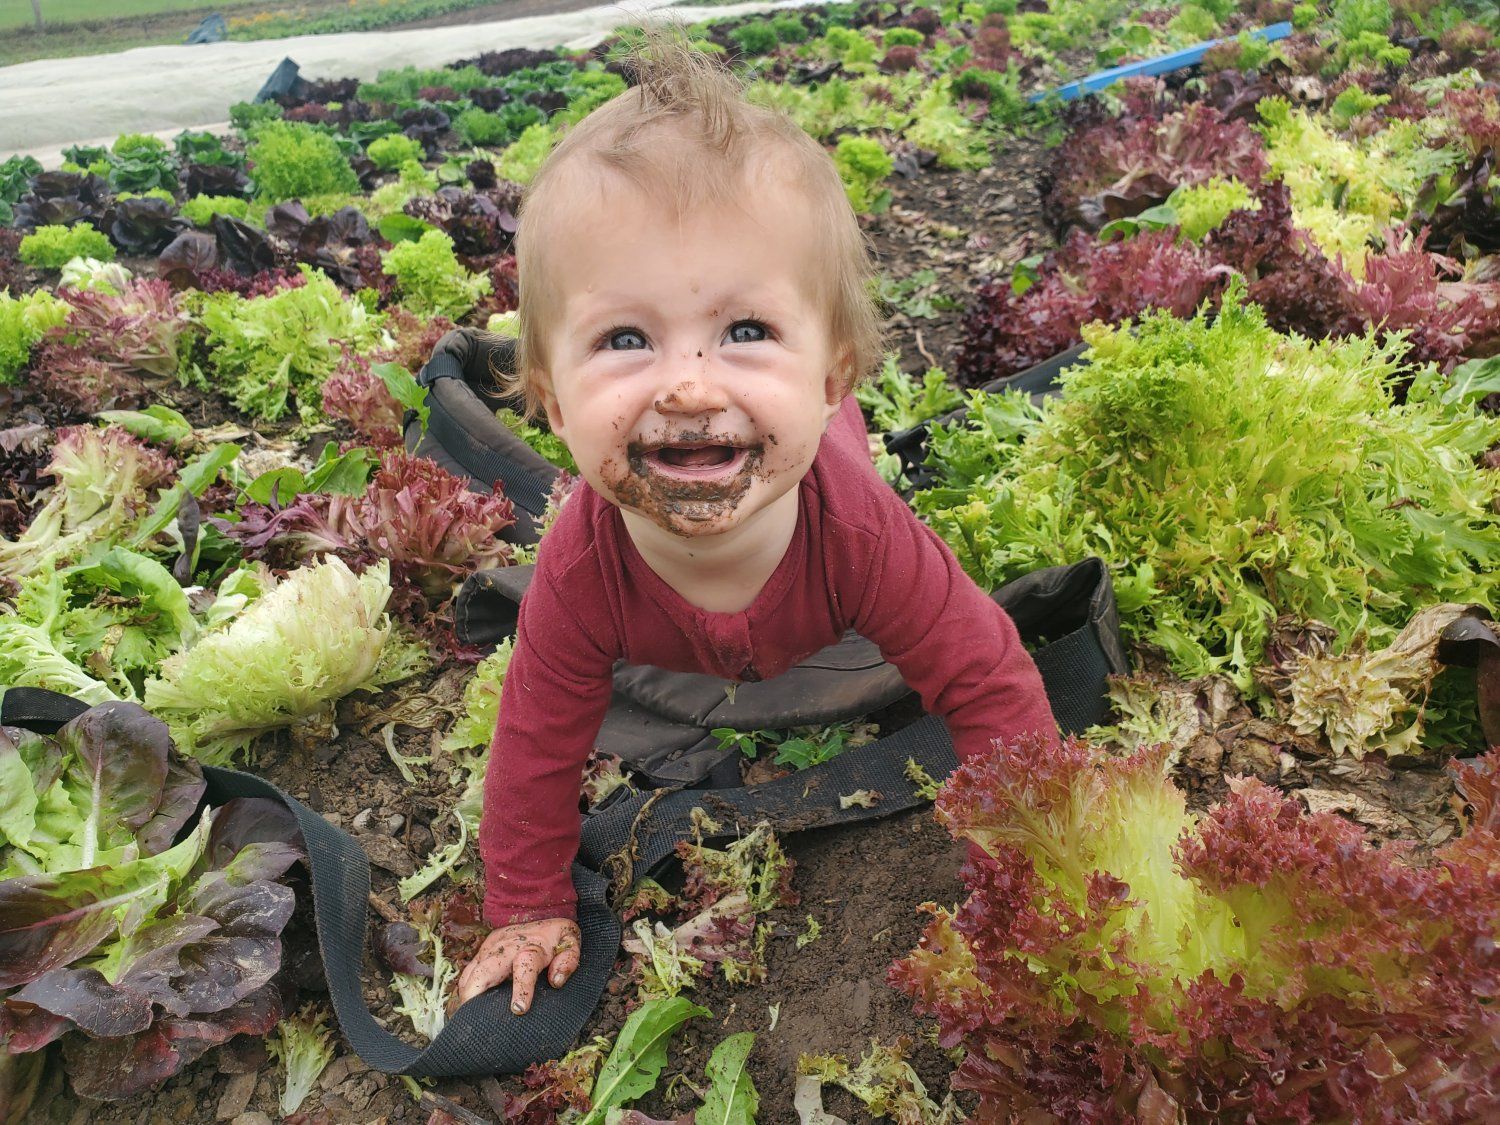 Next Happening: Lettuce Rejoice! August 26, 2021- From Soil Health to Gut Health